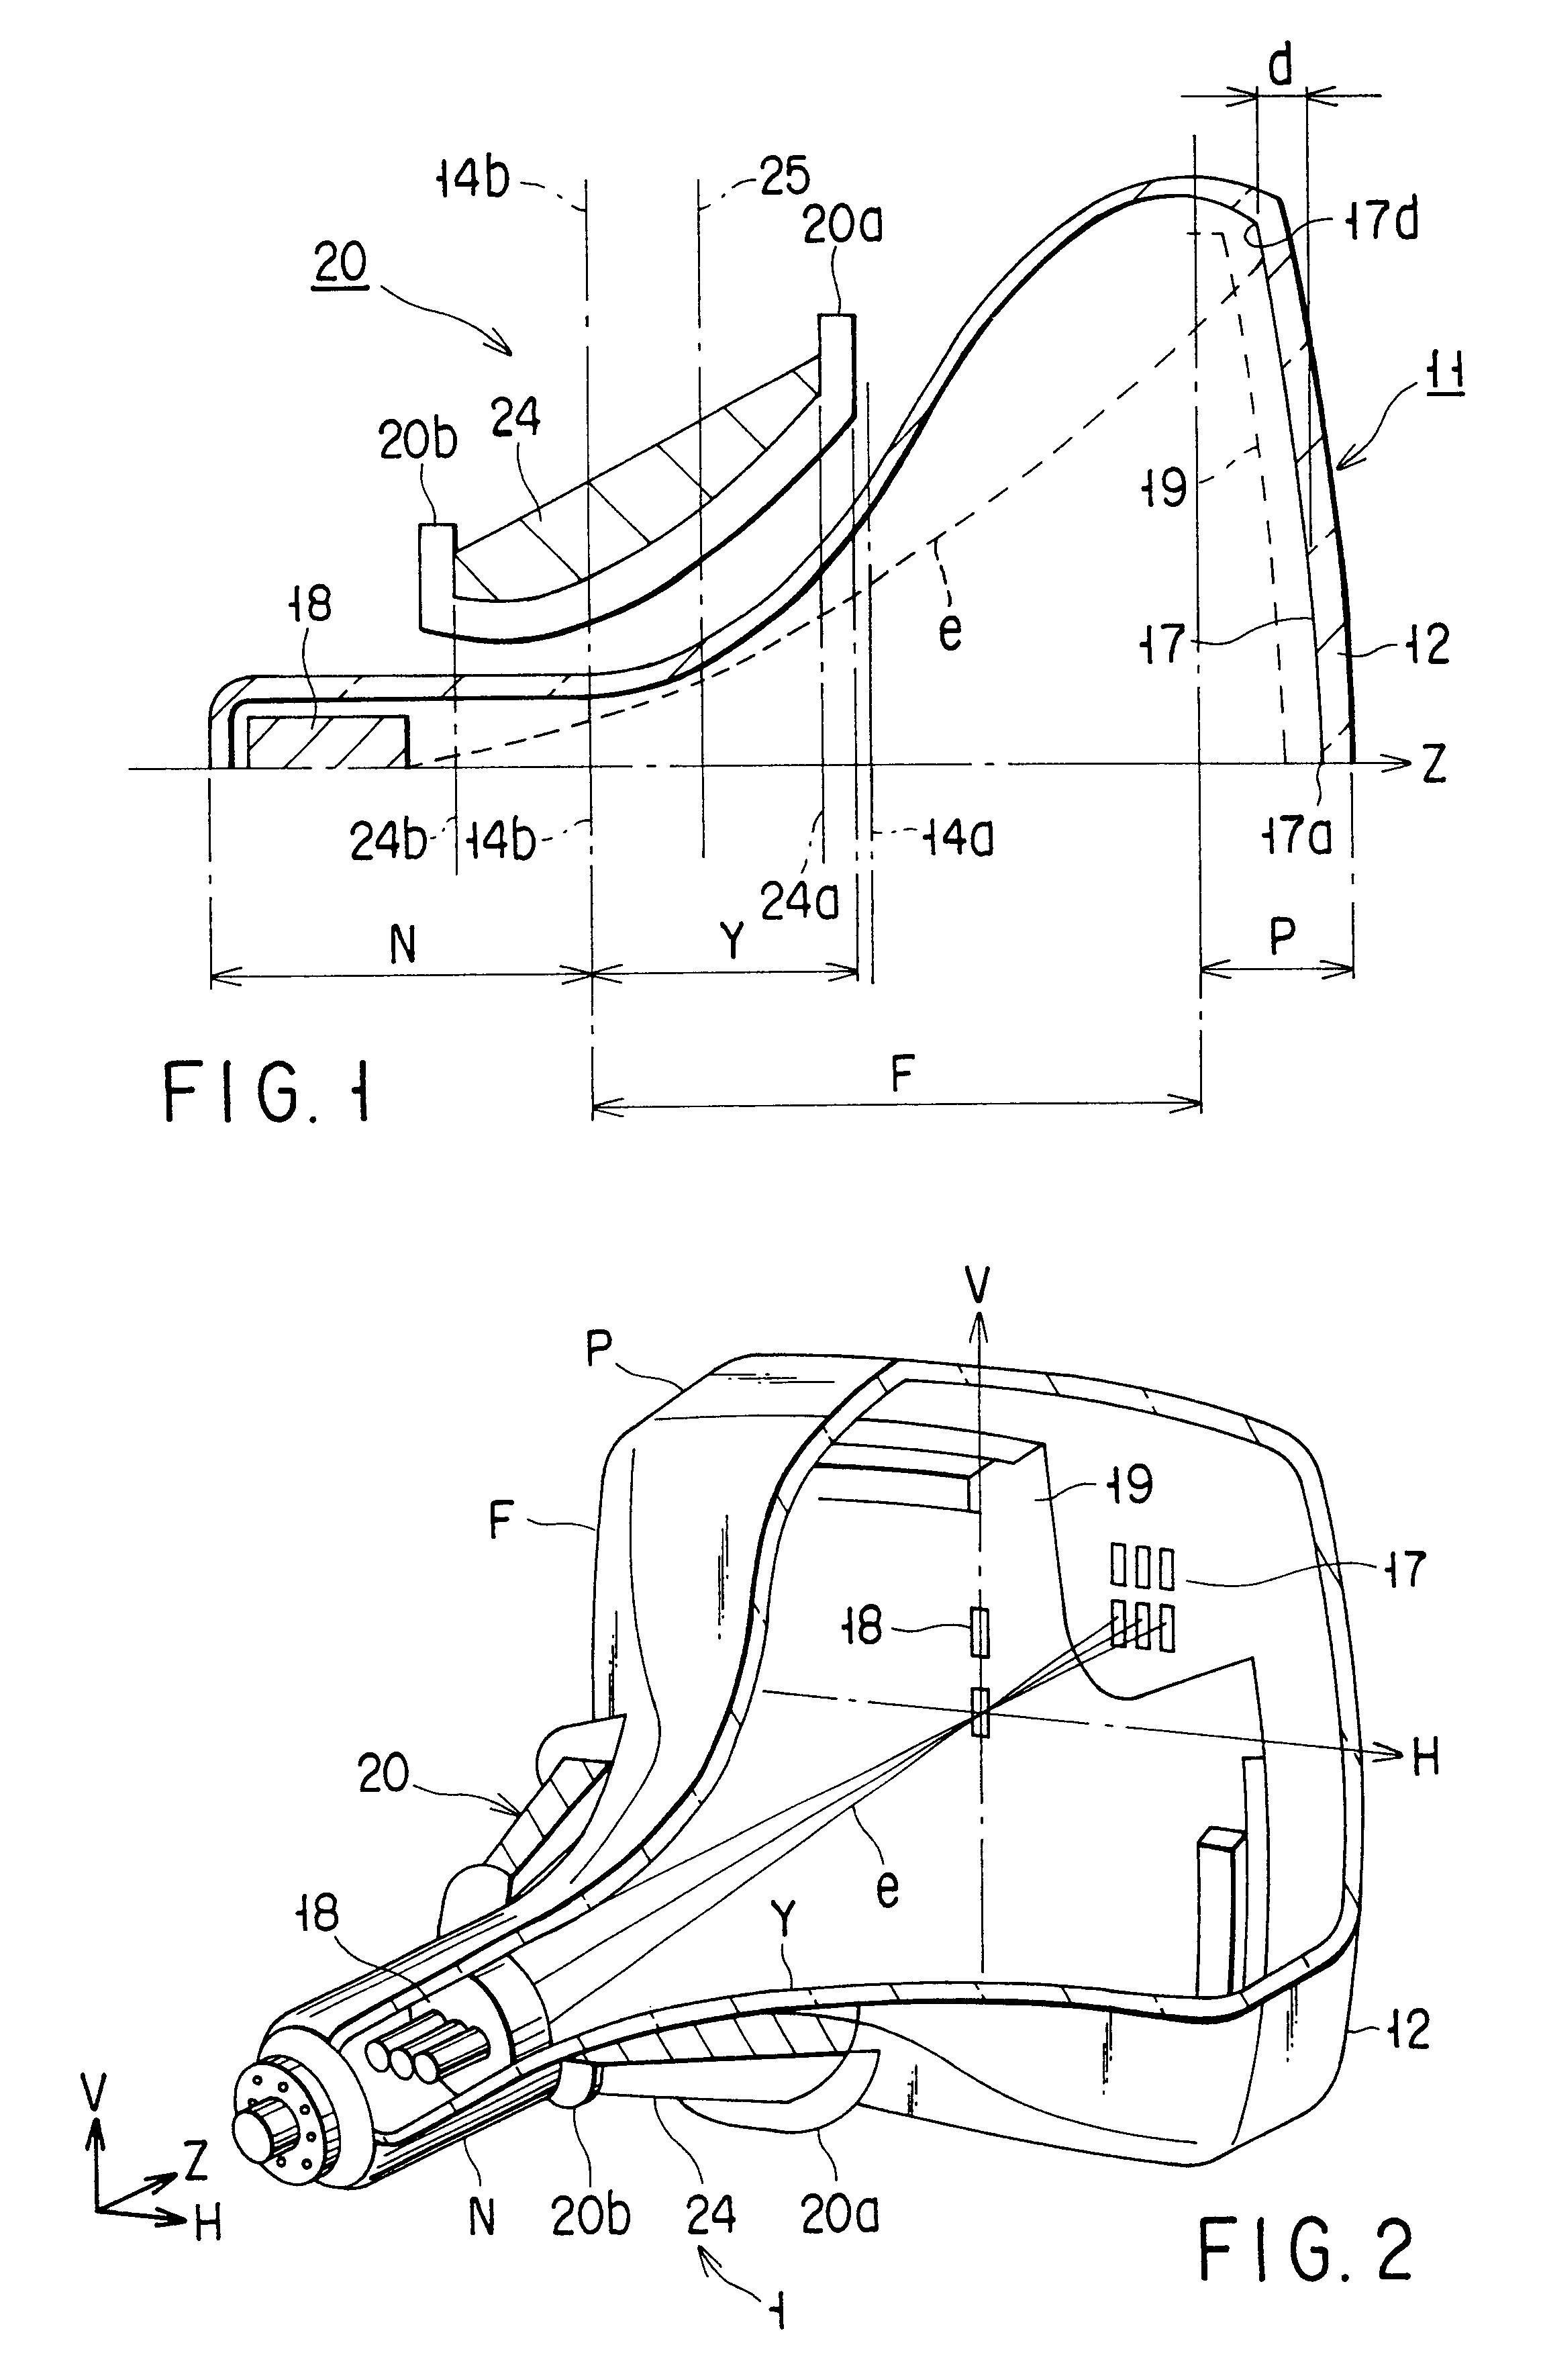 Cathode-ray tube device comprising a deflection yoke with a non-circular core having specified dimensional relationships